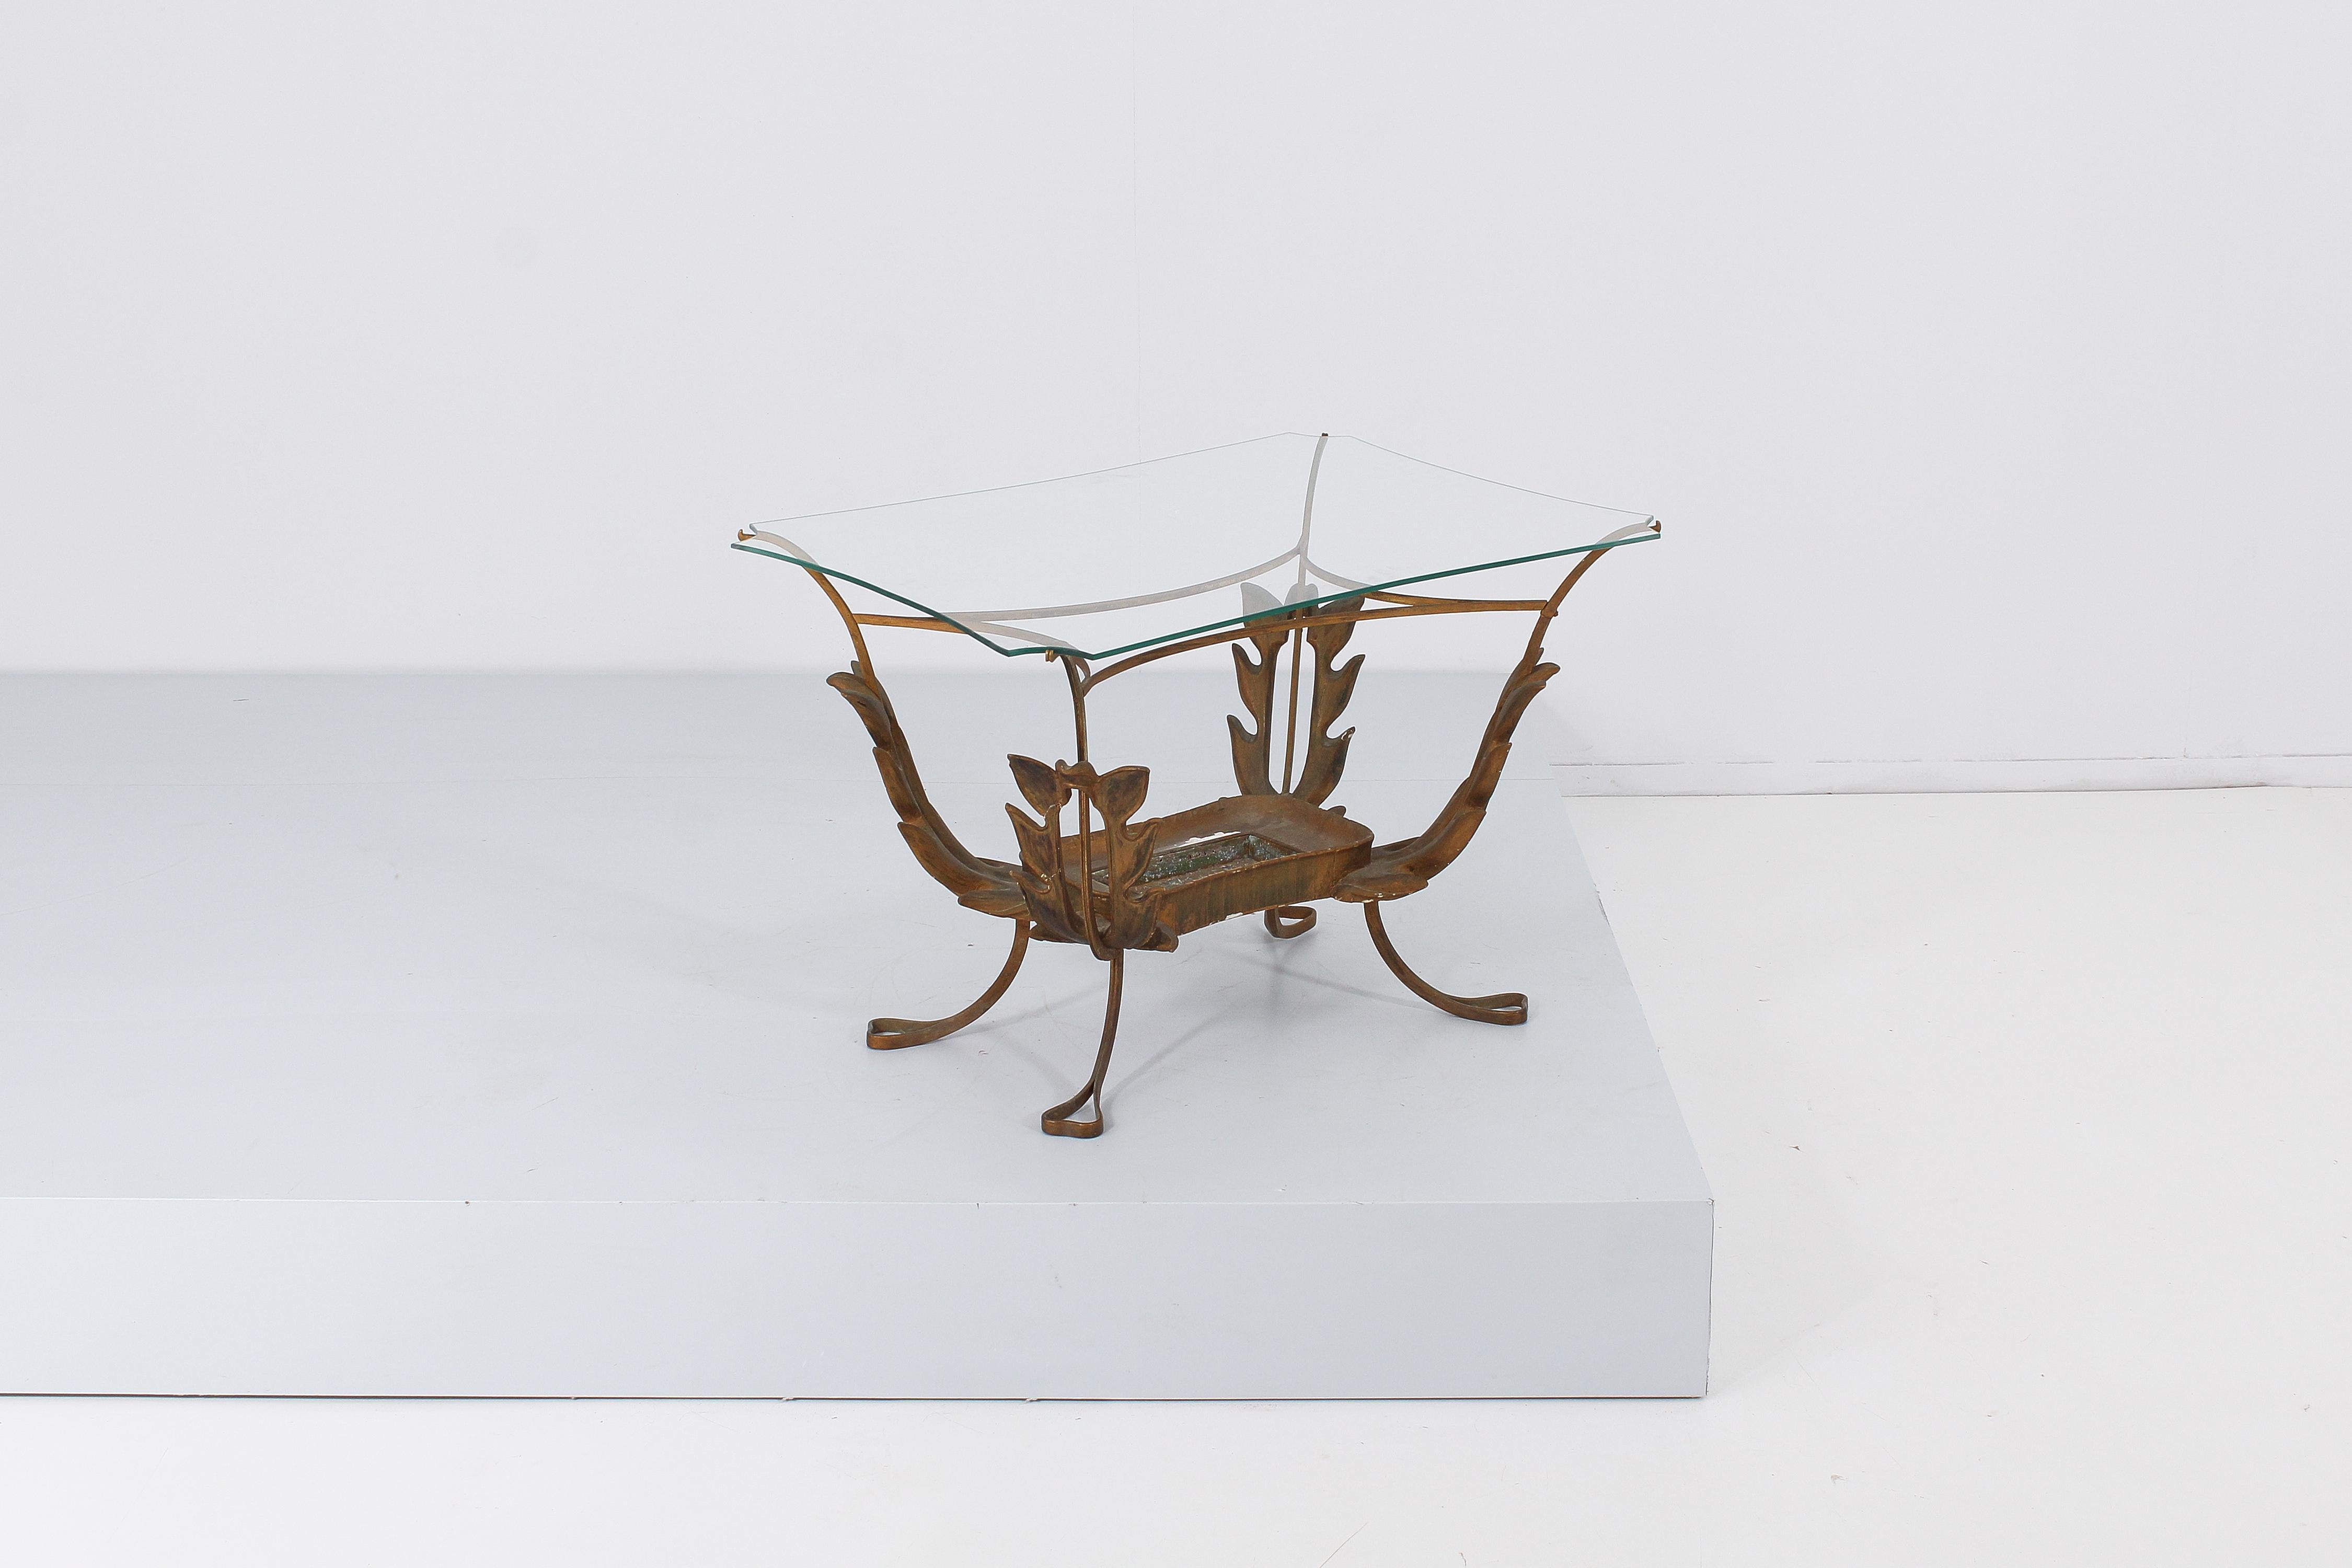 Delicious rectangular coffee table in curved brass, shaped glass top and decorative elements in the shape of large leaves in carved and lacquered wood. Under the glass top, a metal tray (worn as seen in the photo) can hold a plant, making the table